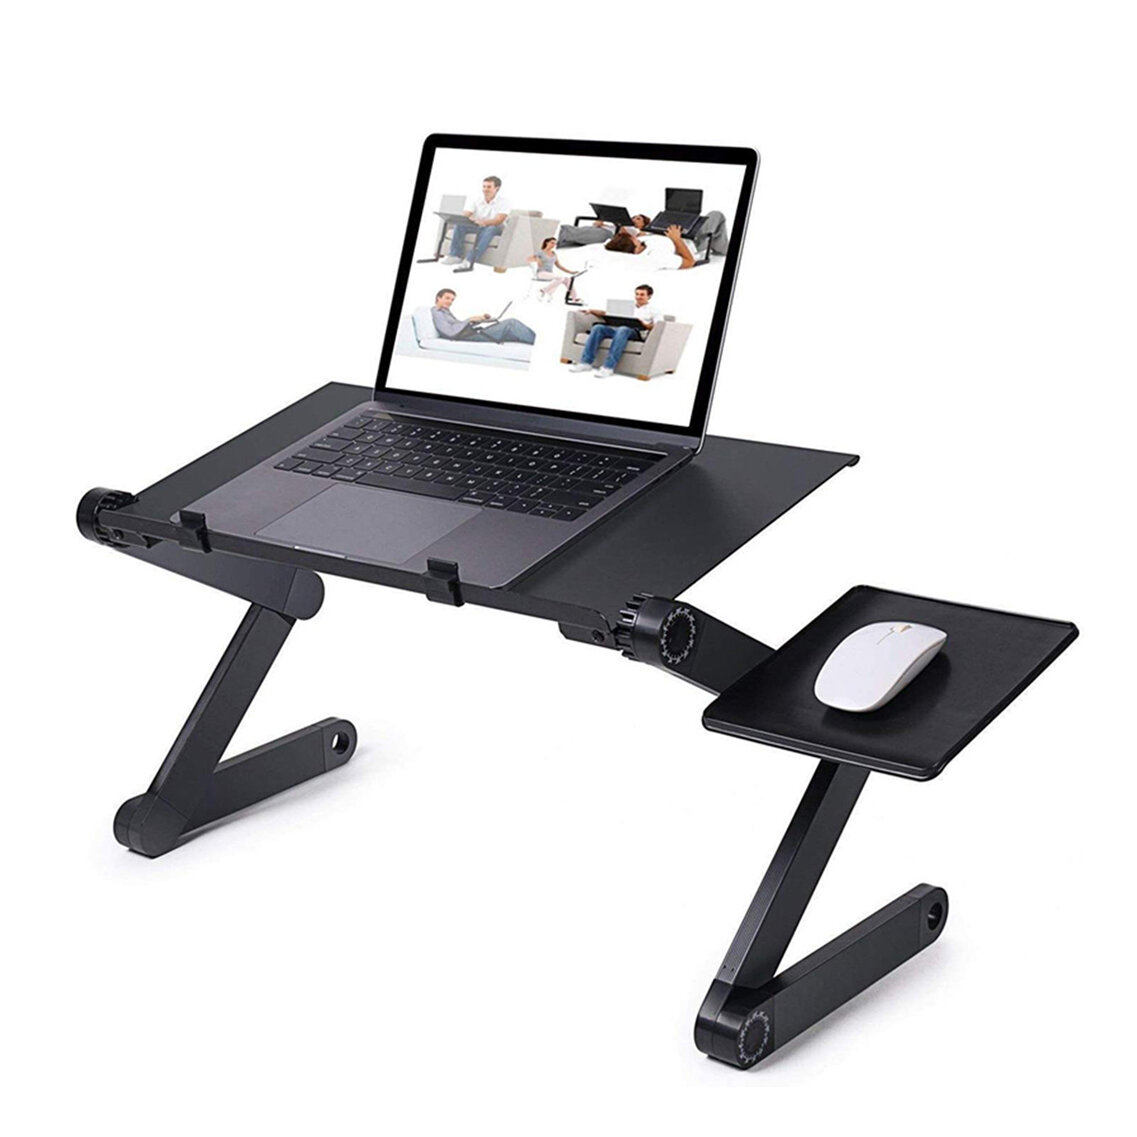 Image of Adjustable Laptop Table Laptop Desk Portable Foldable Stand Bed Tray Laptop with Cooling Fan and Mouse Pad for up to 17